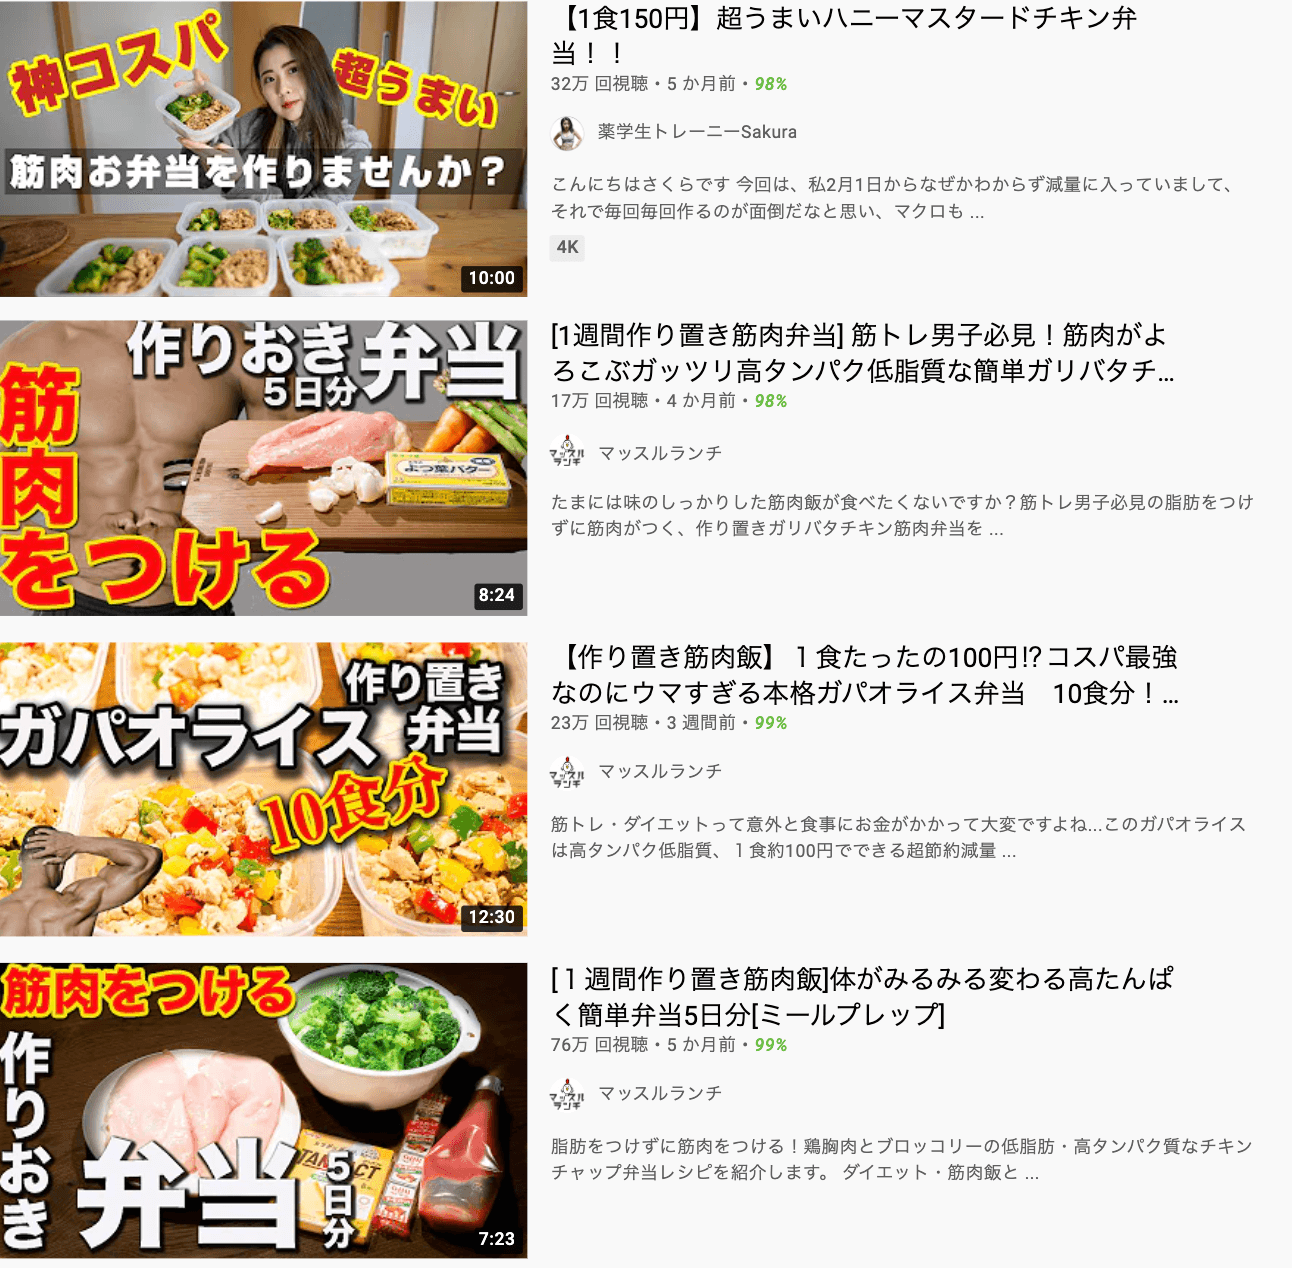 youtube-training lunch-top display